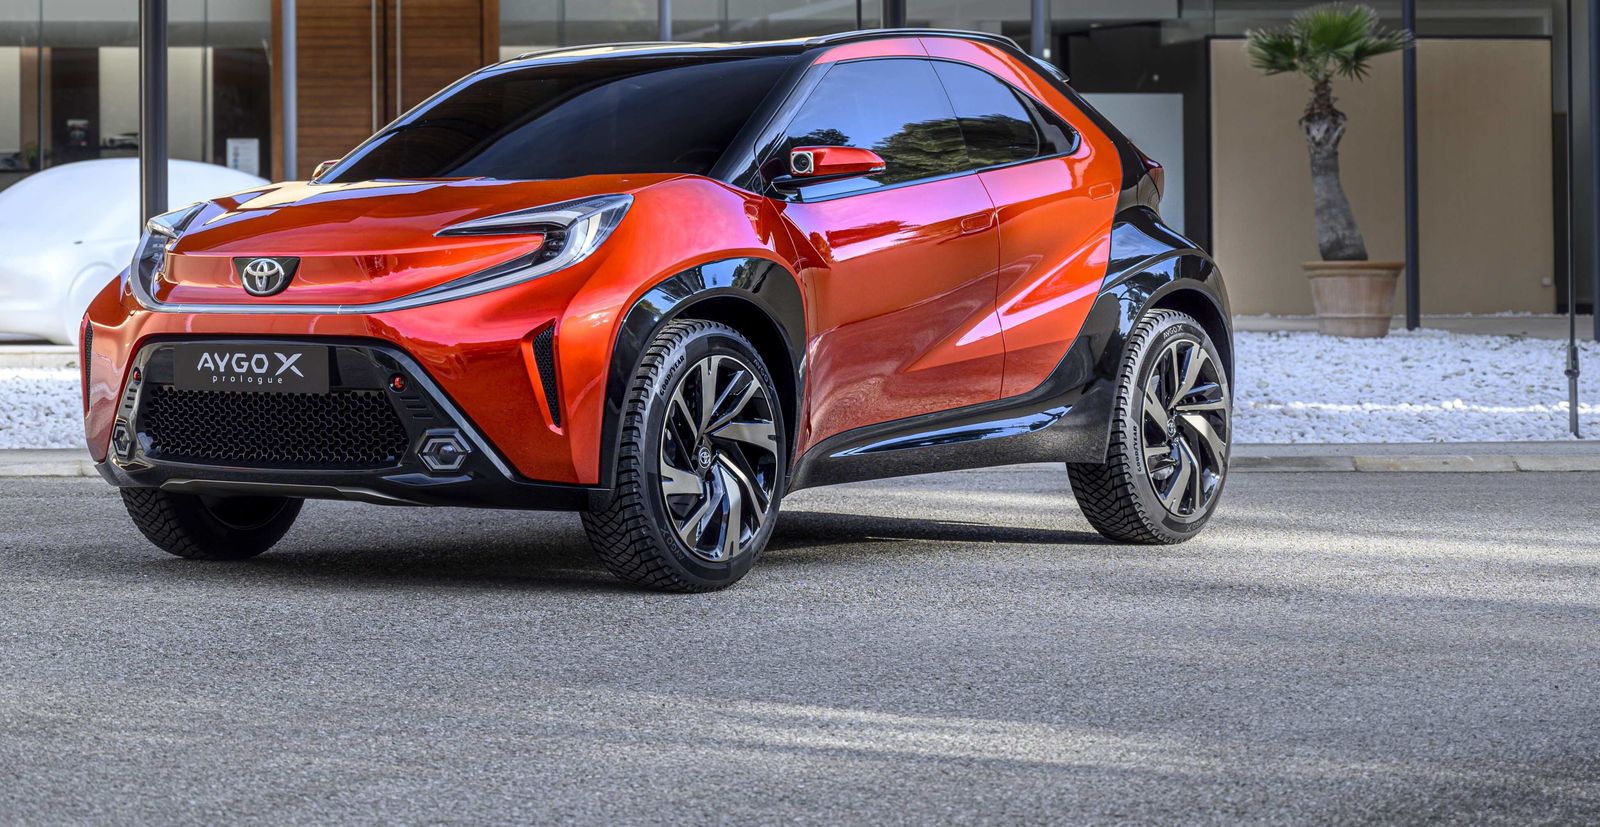 Toyota Aygo X Prologue concept car, with bold looks, showcased